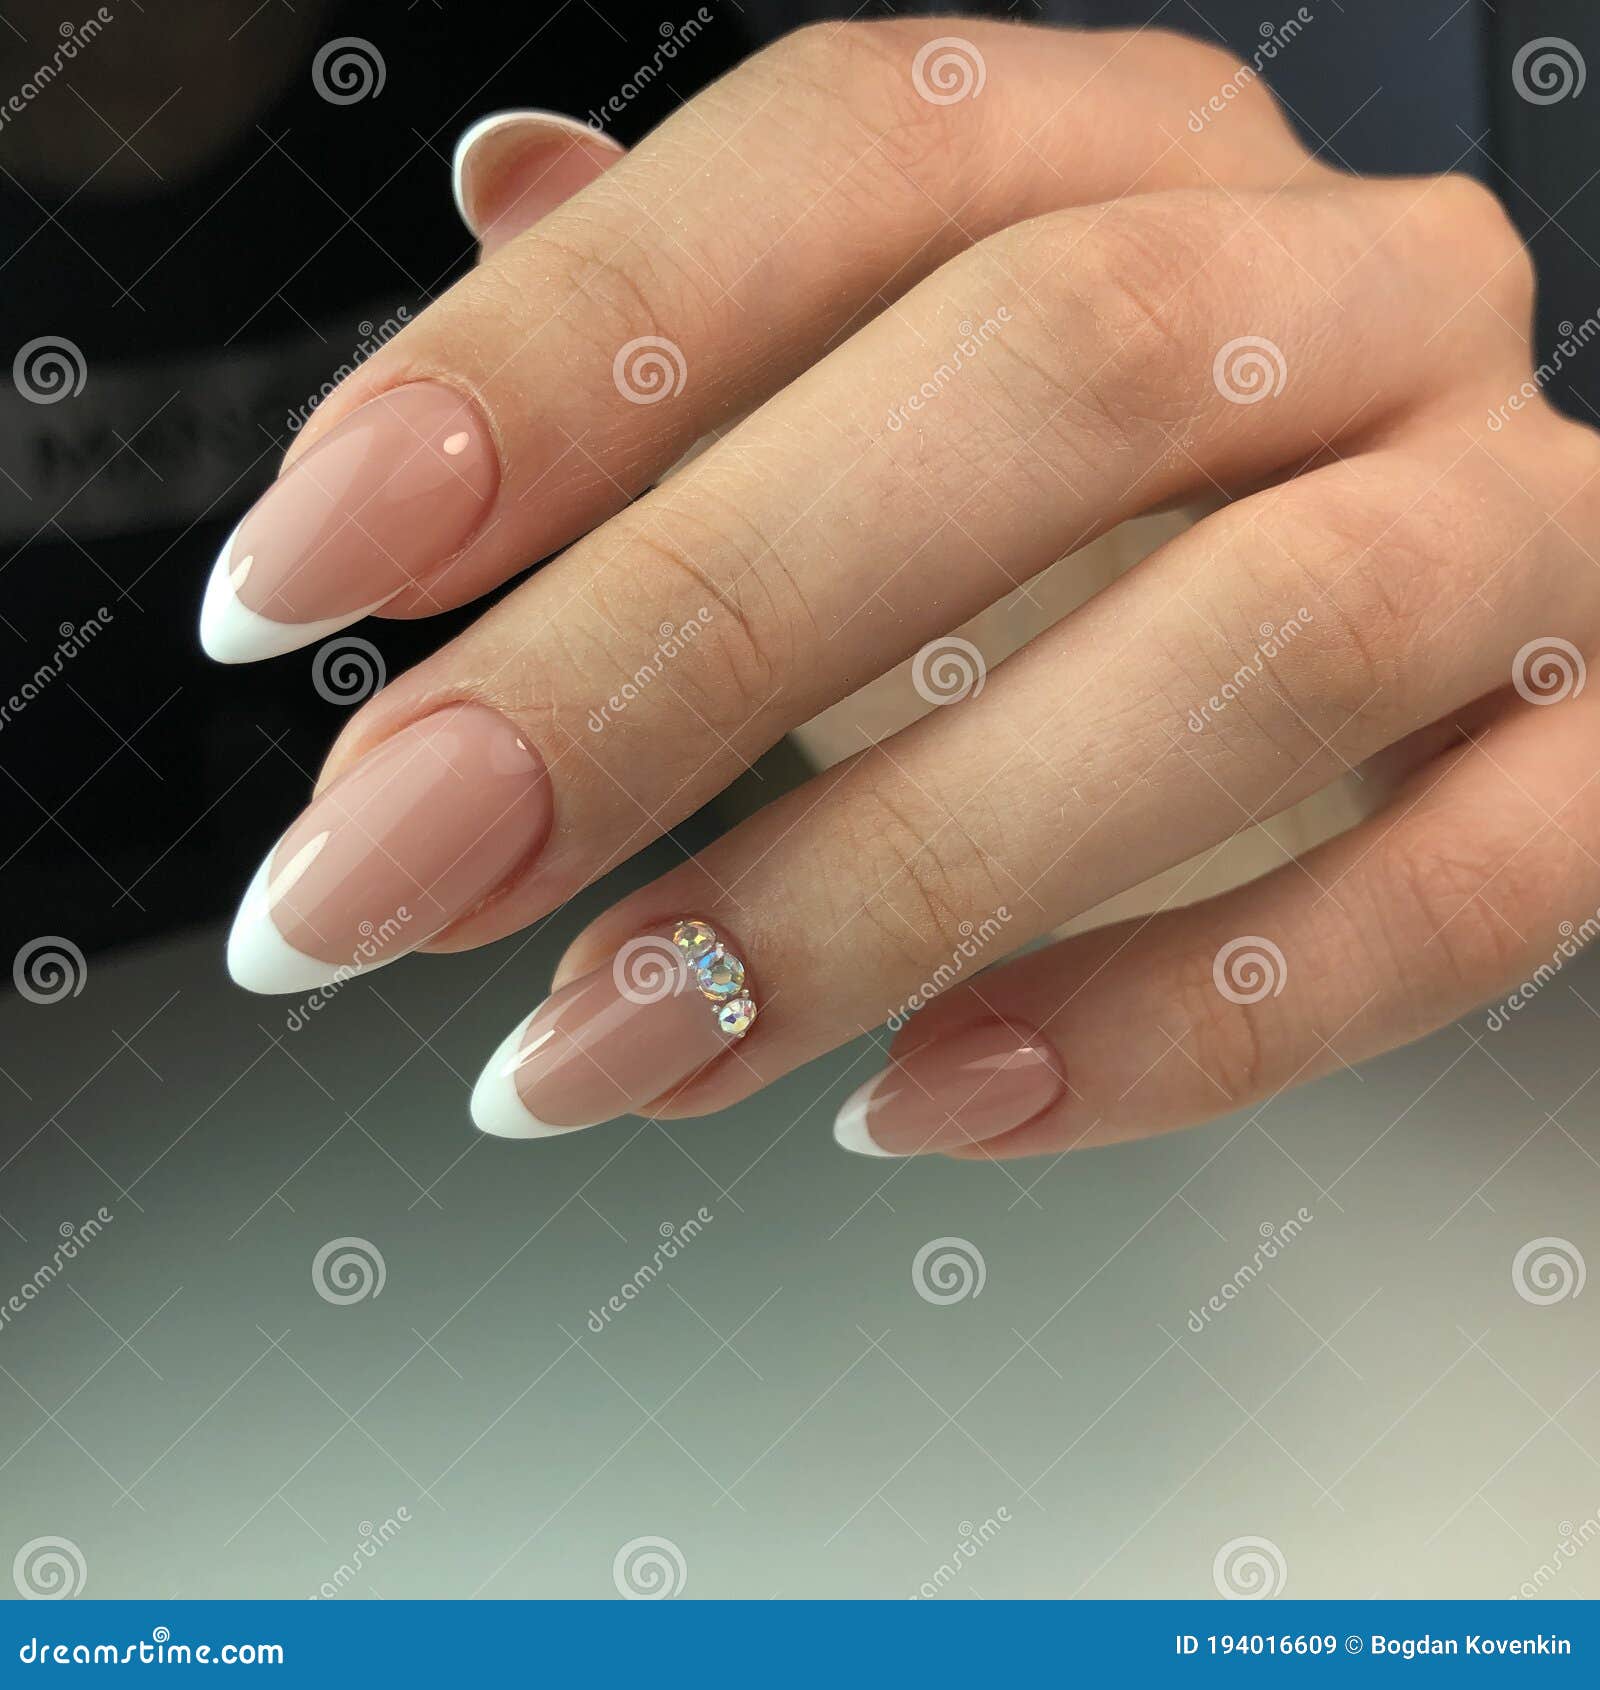 French Manicure On The Nails. French Manicure Design. Manicure Gel Nail  Polish Stock Image - Image Of Background, Nail: 194016609